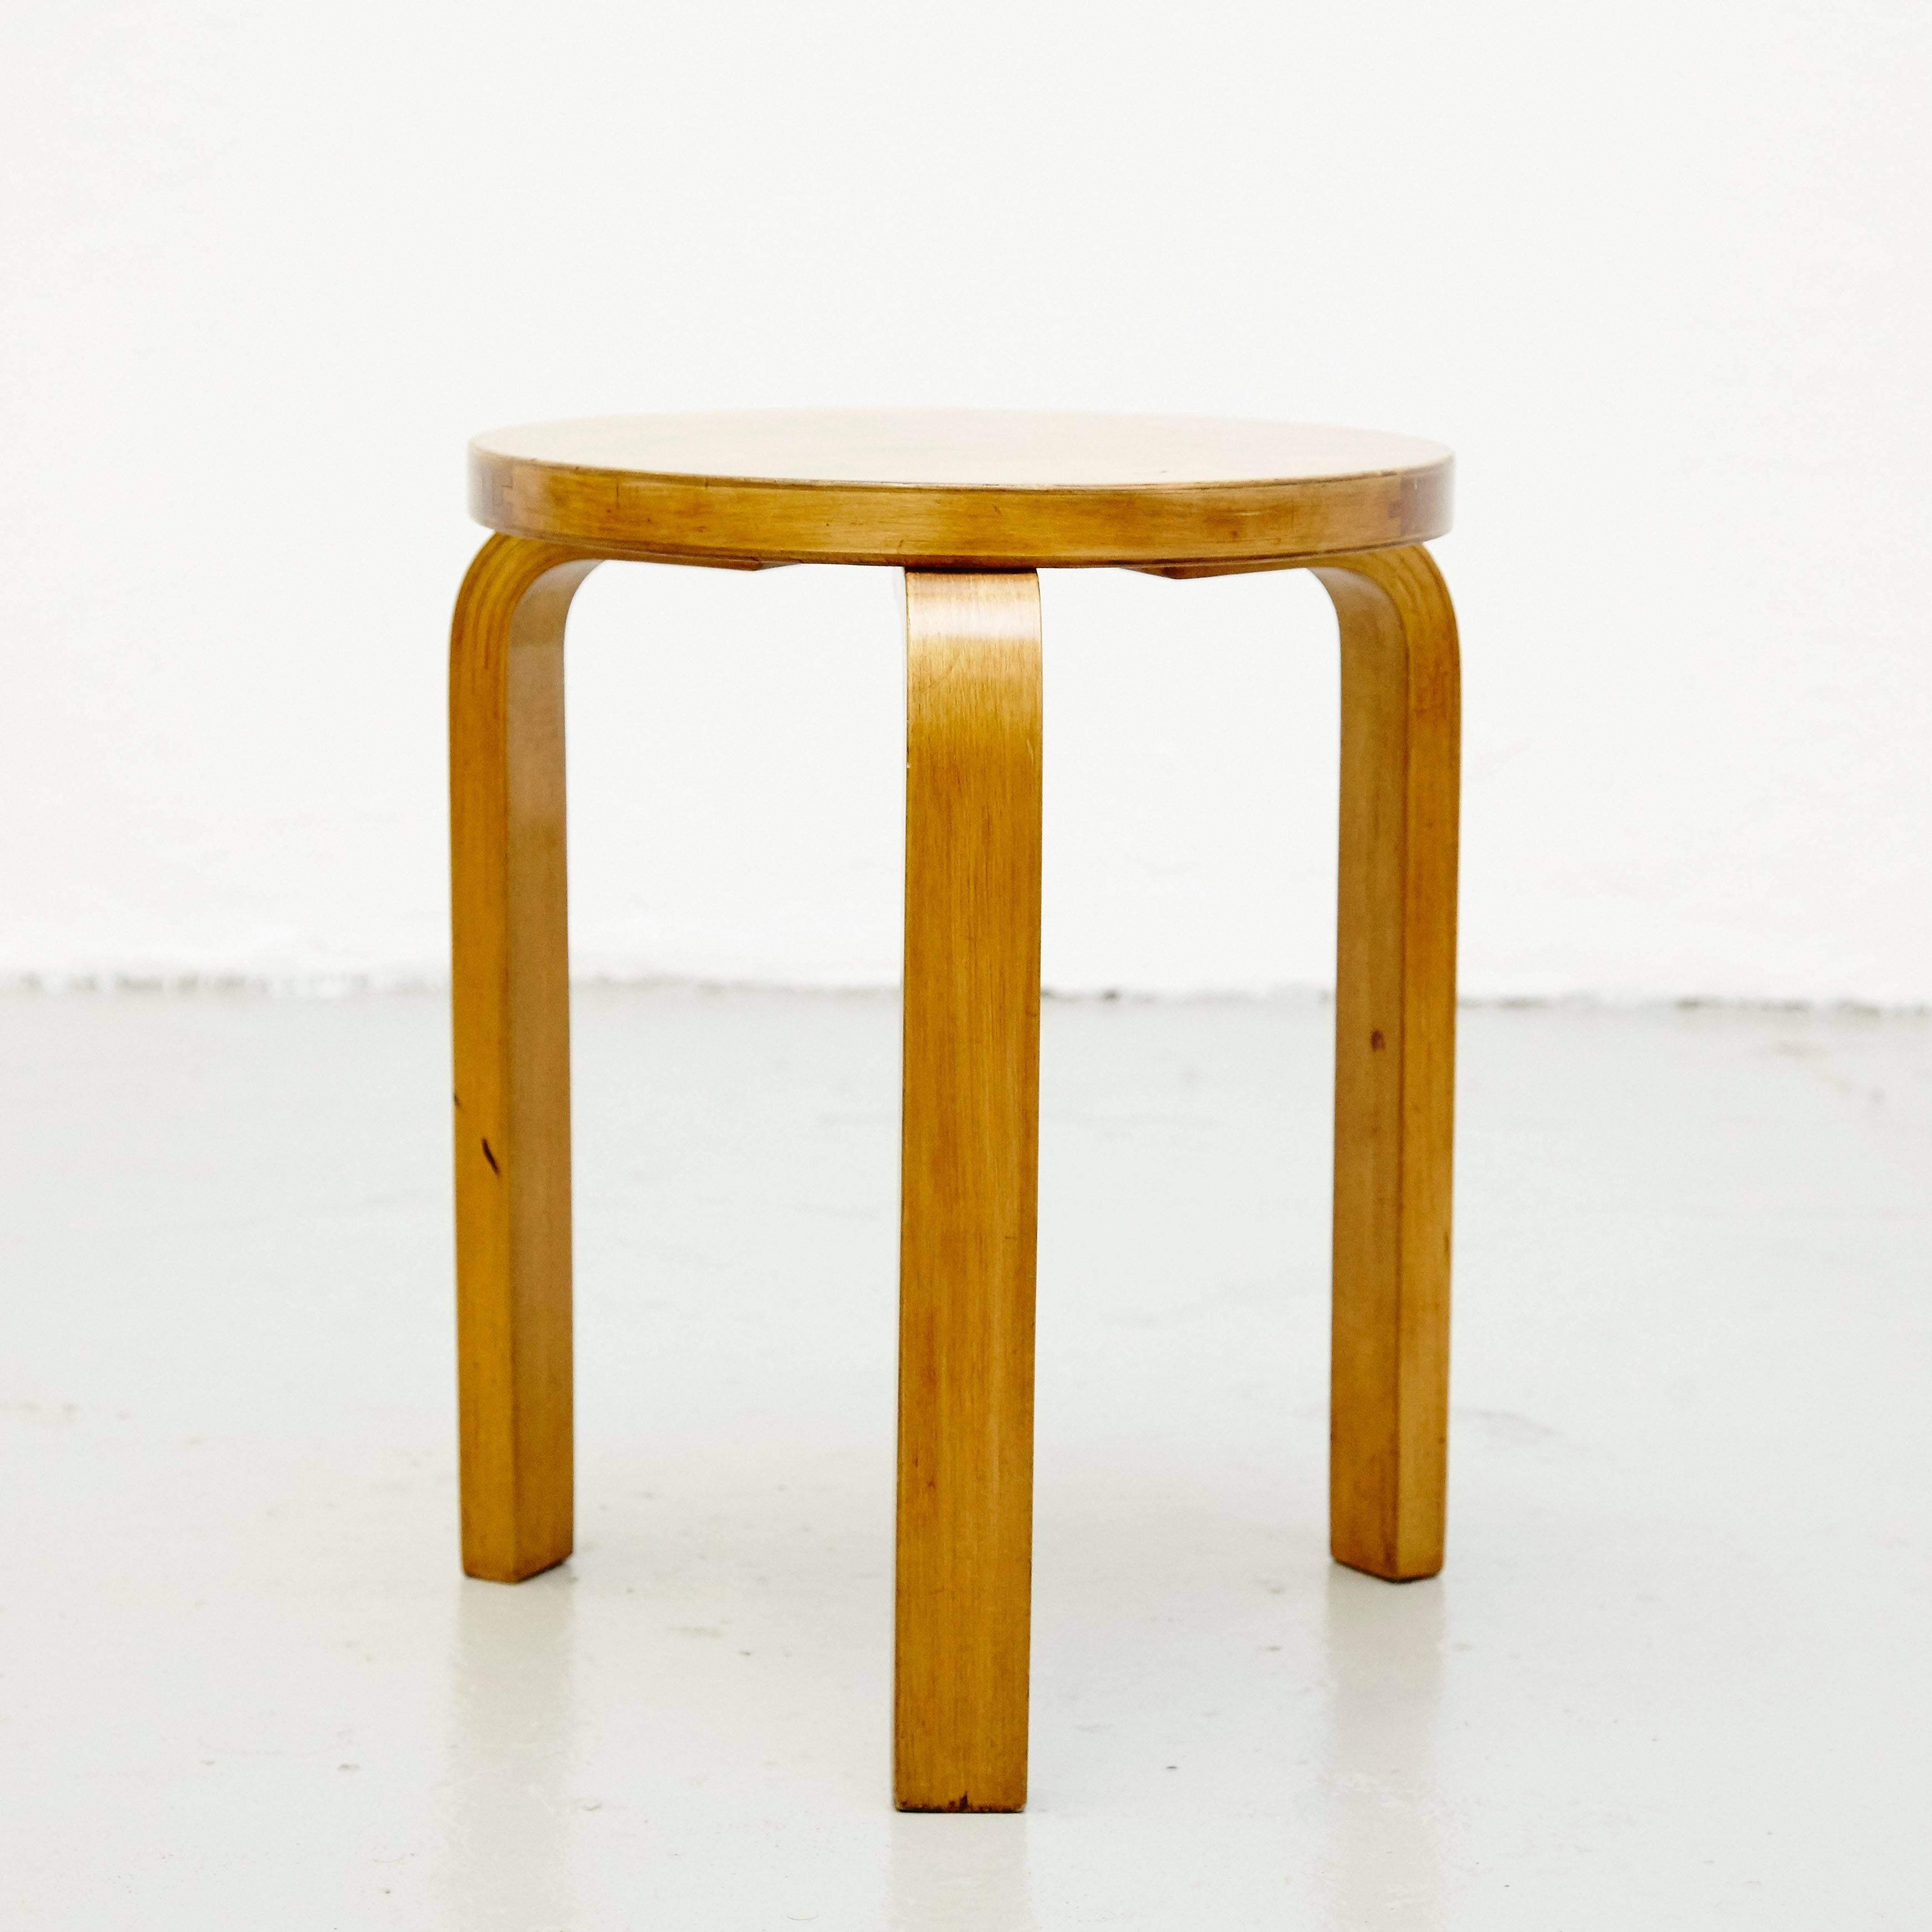 Stool designed by Alvar Aalto, circa 1930.
Manufactured by Artek (Finland) Distributed by Finmar (England).
Wood legs and structure.
Labelled to the underside.

This wood stool is designed by the designer Alvar Aalto. It is a round shaped stool with